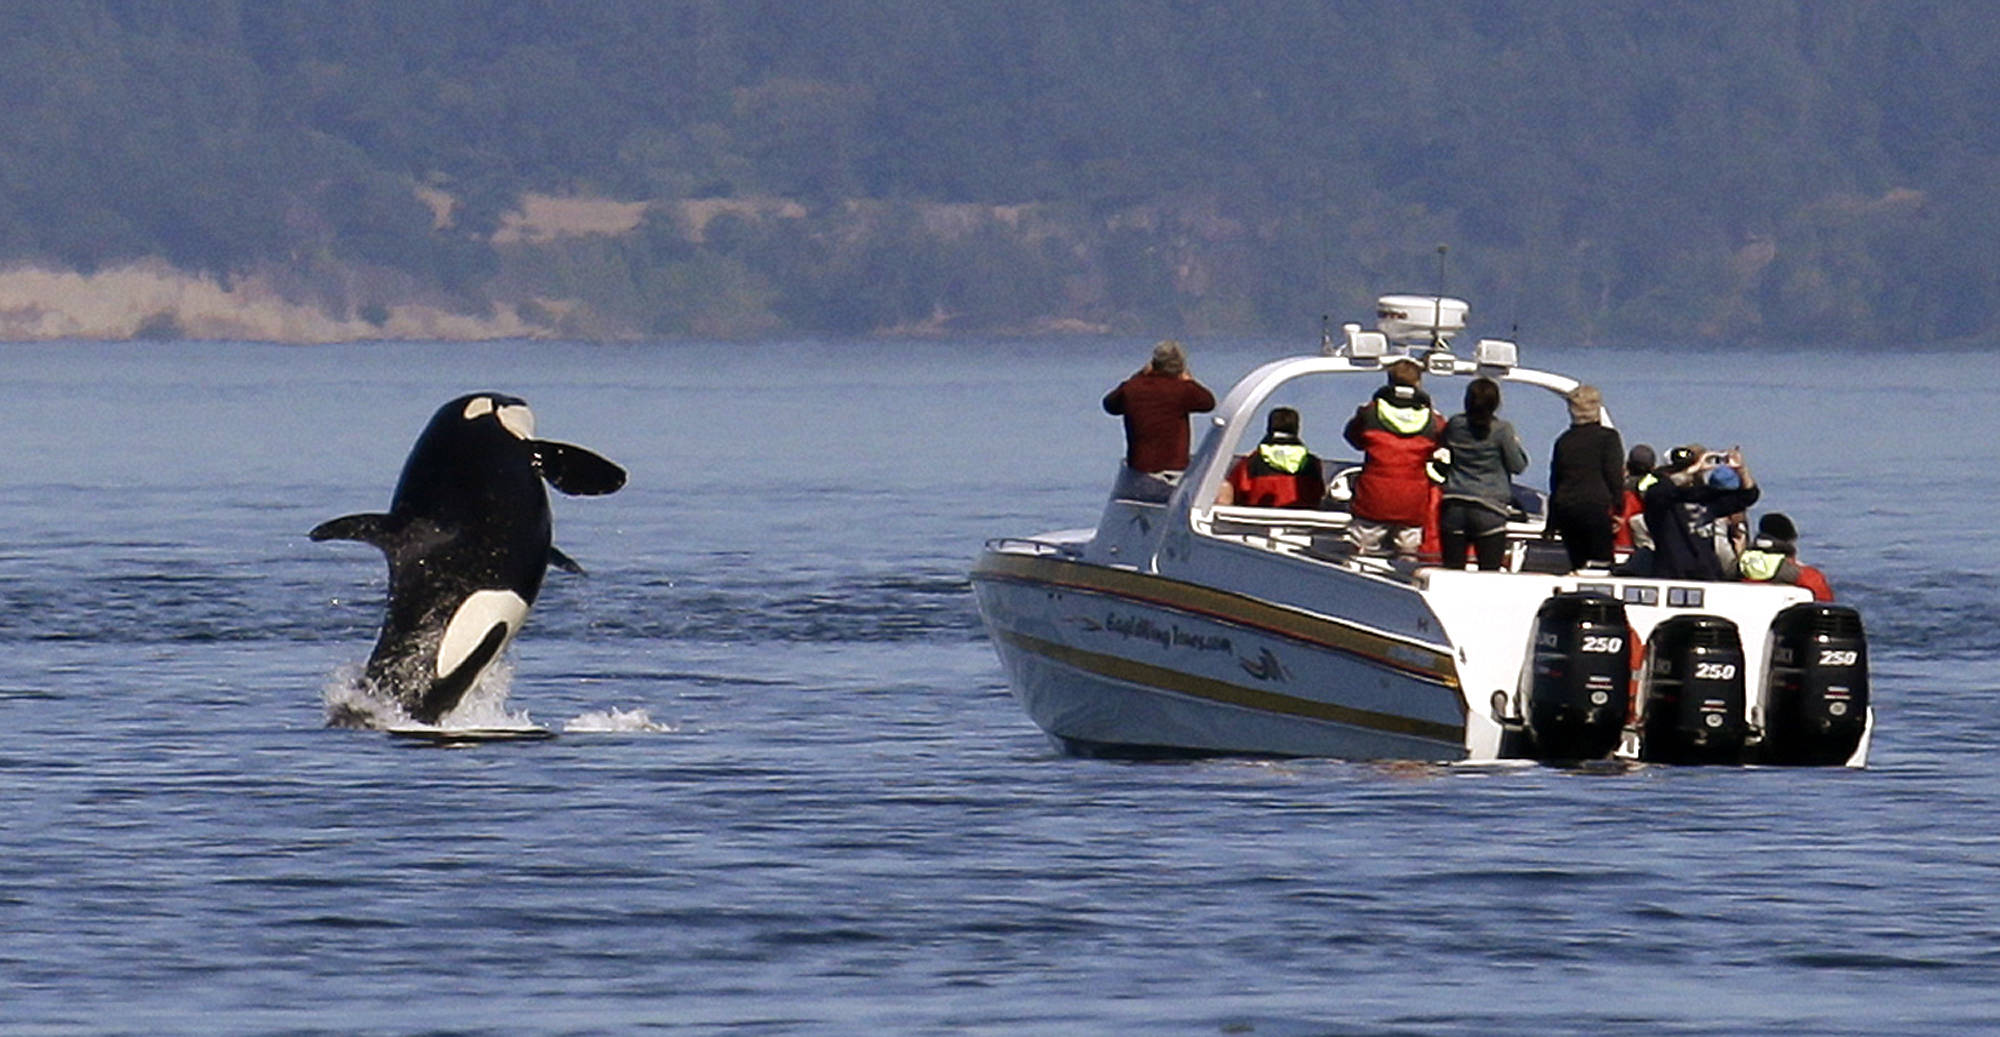 In this photo taken July 31, 2015, an orca whale leaps out of the water near a whale watching boat in the Salish Sea in the San Juan Islands, Washington. Ships passing the narrow busy channel off Washington’s San Juan Islands are slowing down this summer as part of an experiment to protect the small endangered population of southern resident killer whales. Vessel noise can interfere with the killer whales’ ability to hunt, navigate and communicate with each other, so US researchers are looking into what impact the project will have on the orcas. (Elaine Thompson | The Associated Press File)